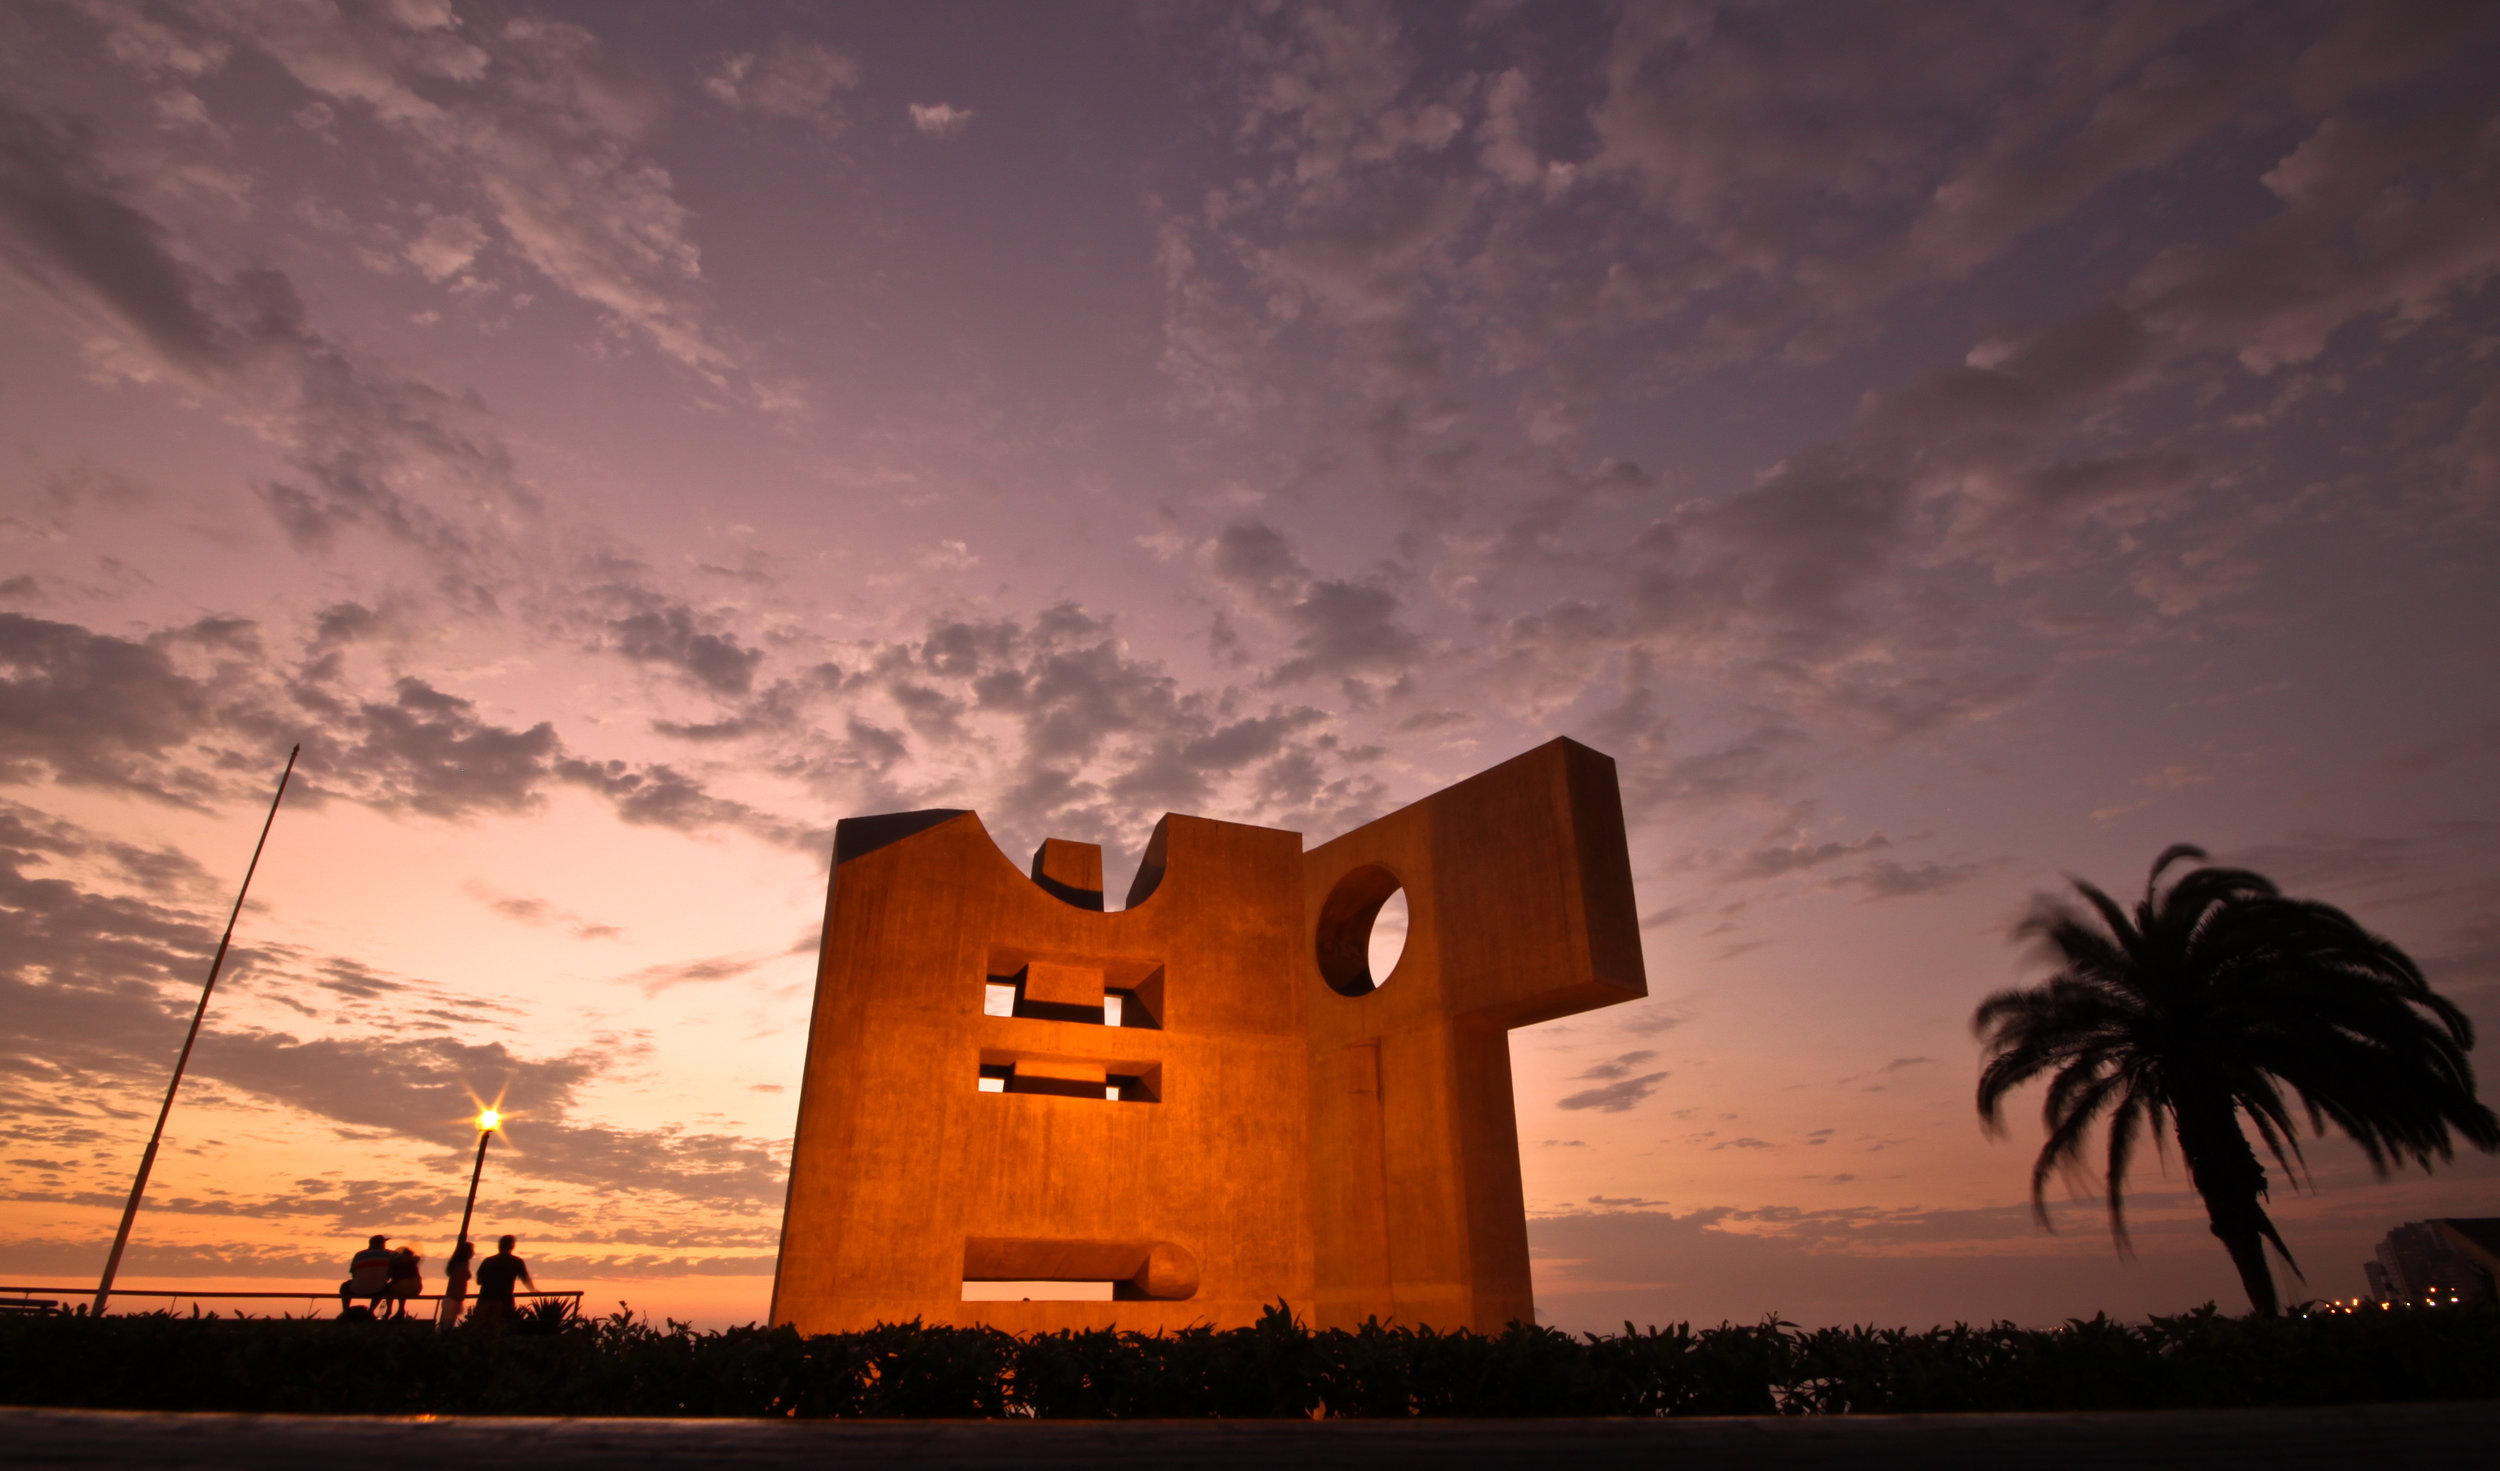 A vivid sun sets over some modern art on the malecon of Miraflores in Lima, Peru.